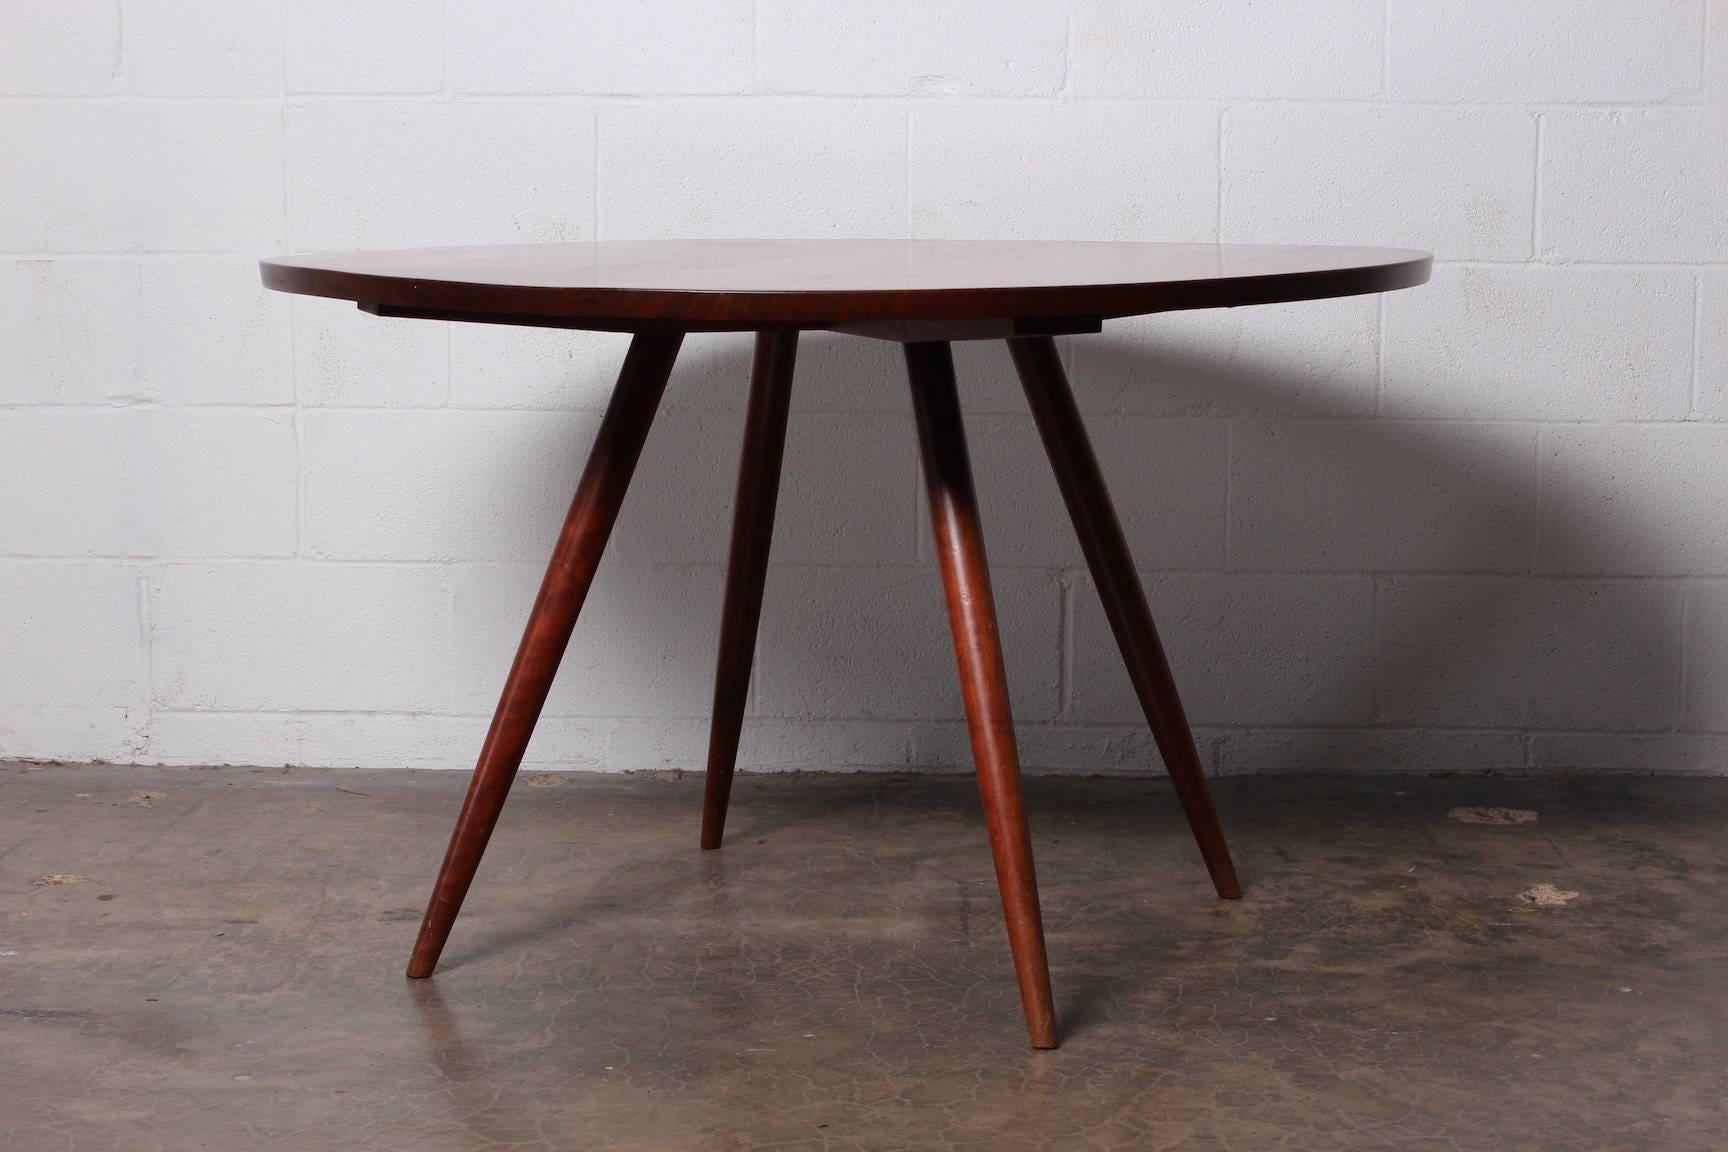 A walnut dining table with cherry legs by George Nakashima. All original with documentation from 1952.